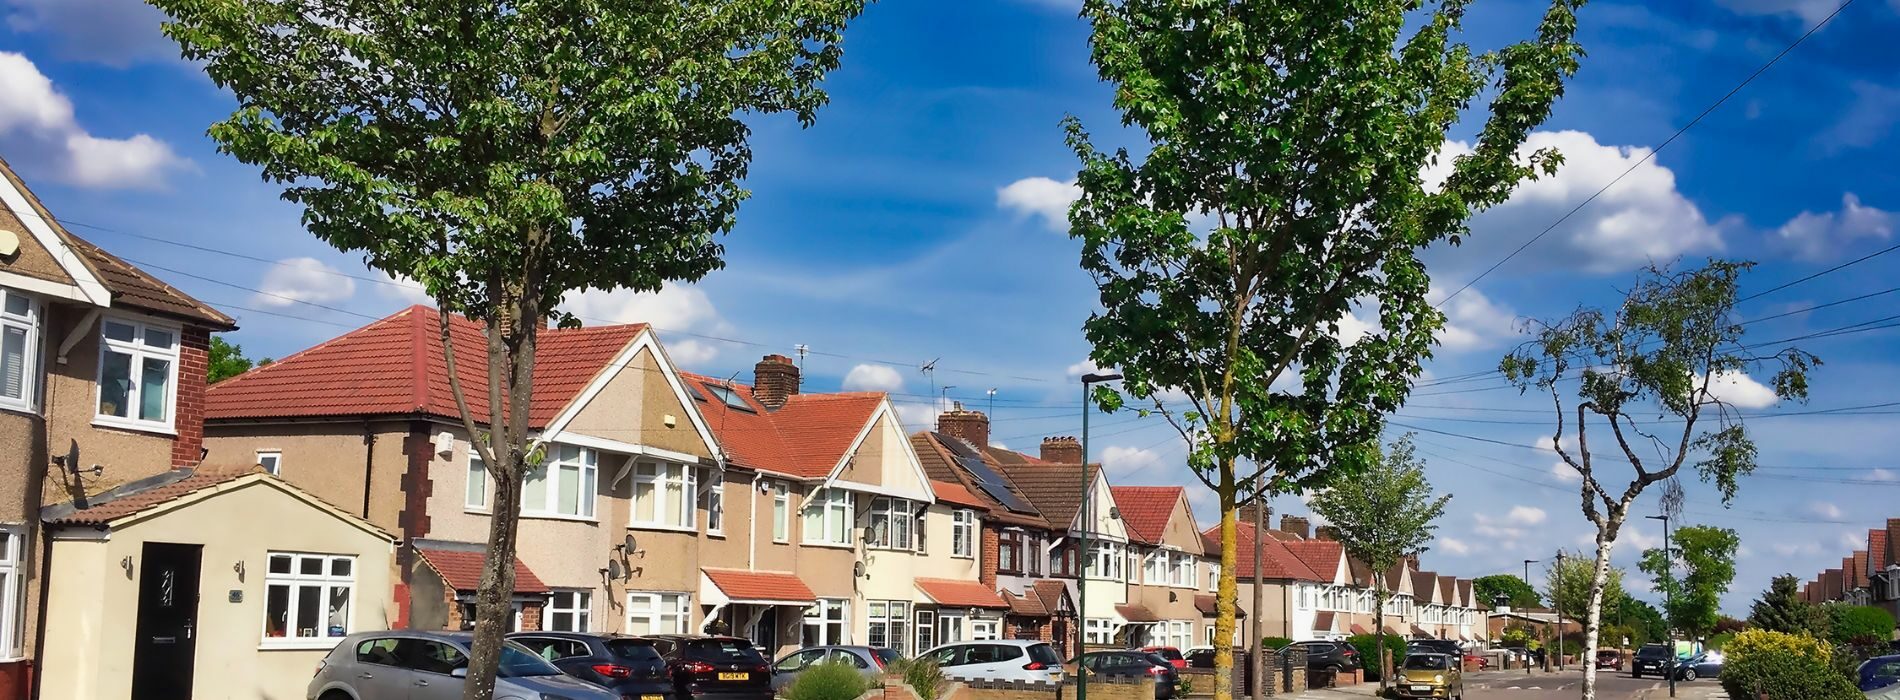 A row of houses on a residential street in Bexley, DA5, would typically consist of terraced houses. Terraced houses are attached properties that form a continuous row, sharing side walls with neighboring houses. They are a common housing type in many residential areas in the UK.